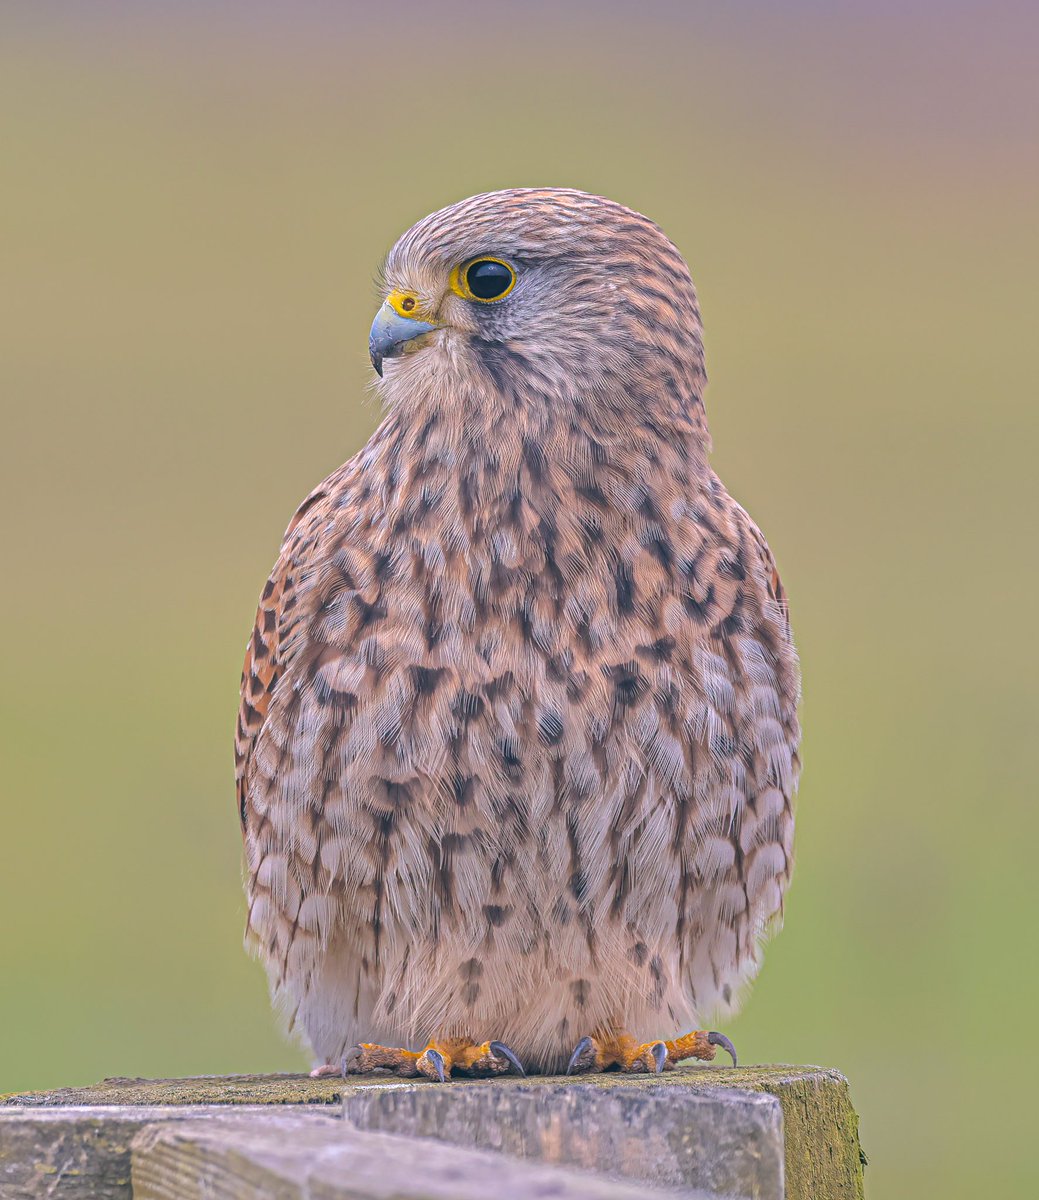 Good morning from me and this beautiful female kestrel UK 🇬🇧 hope you all have a wonderful weekend